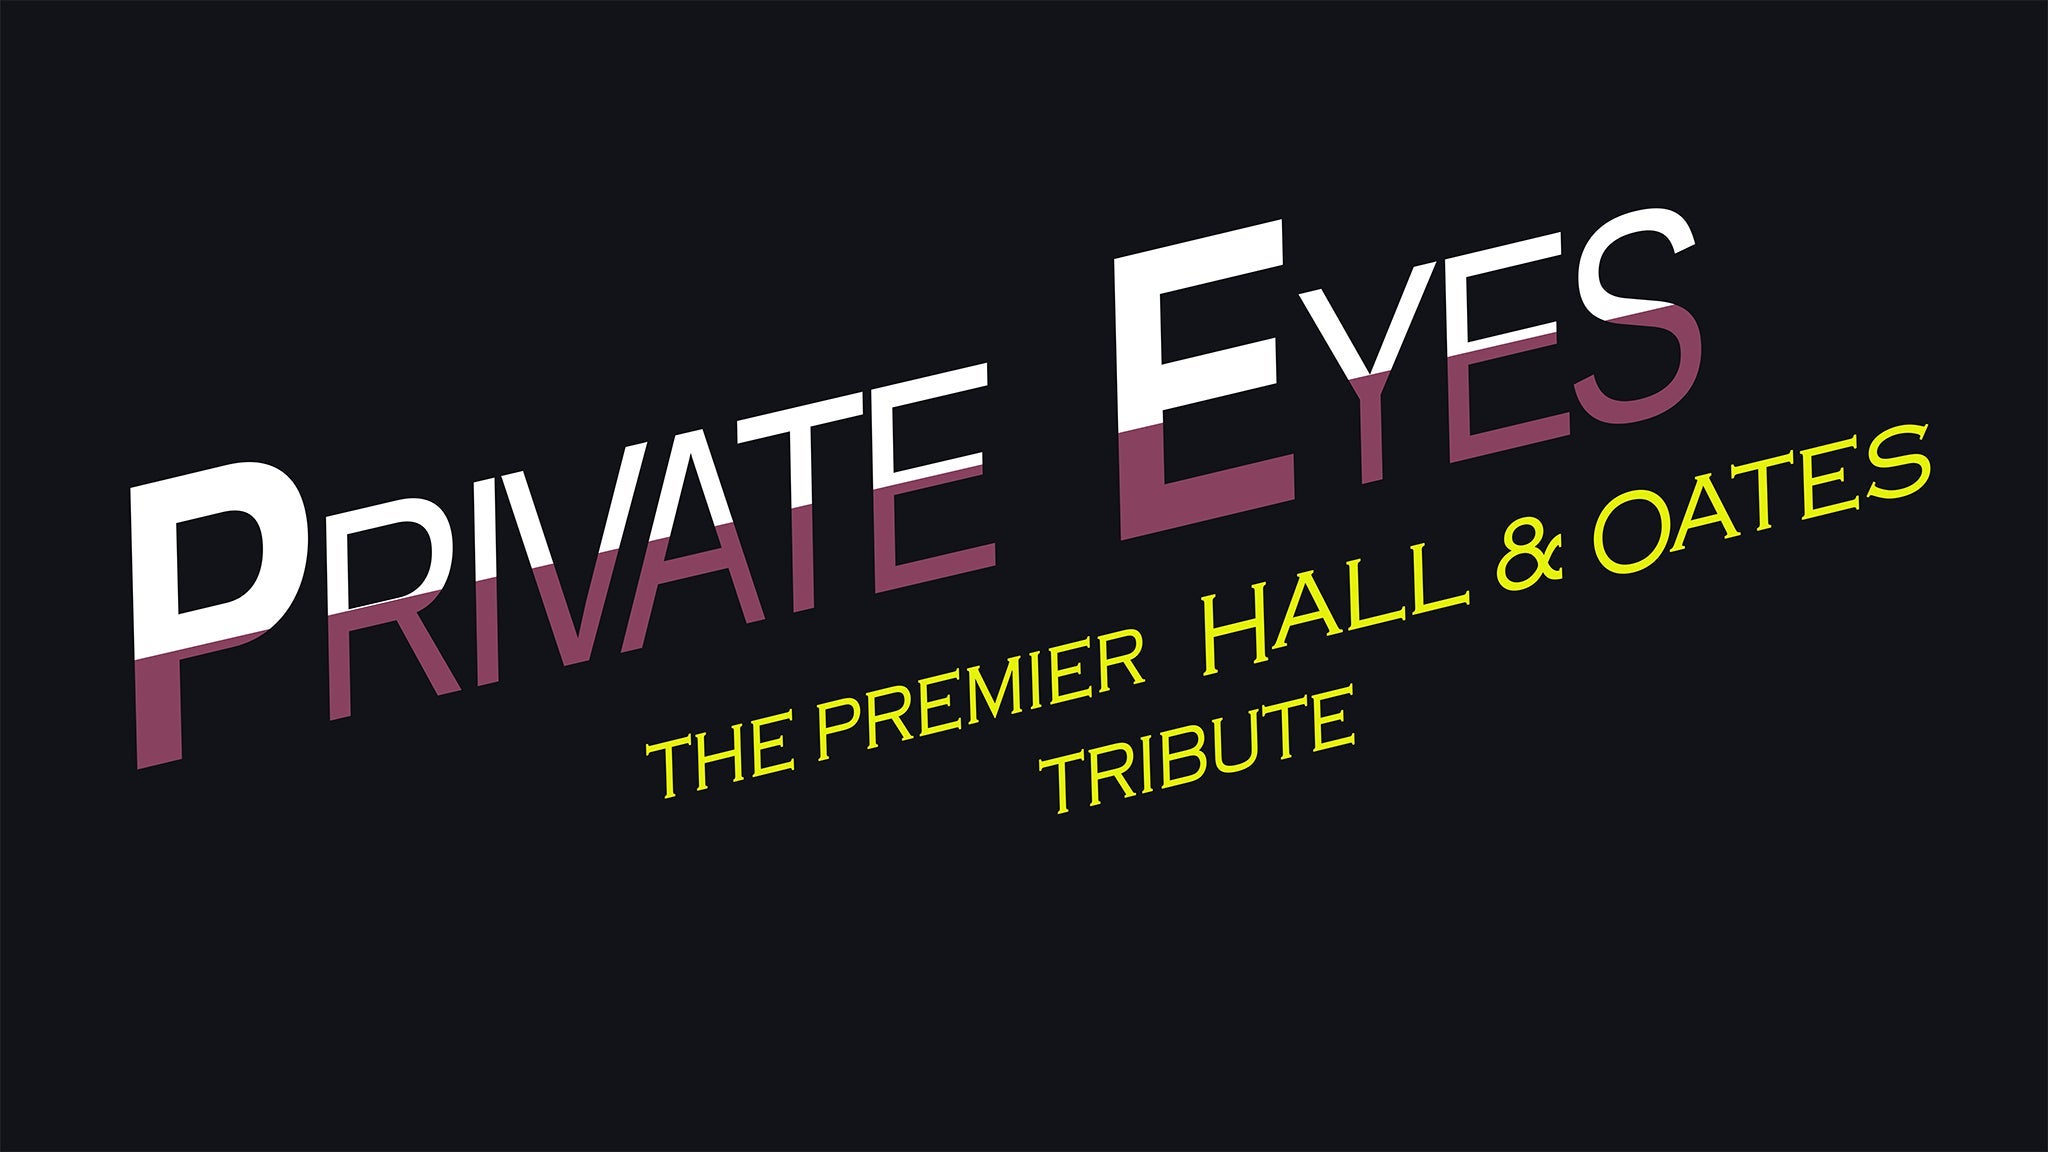 Private Eyes: The Premier Hall & Oates Tribute